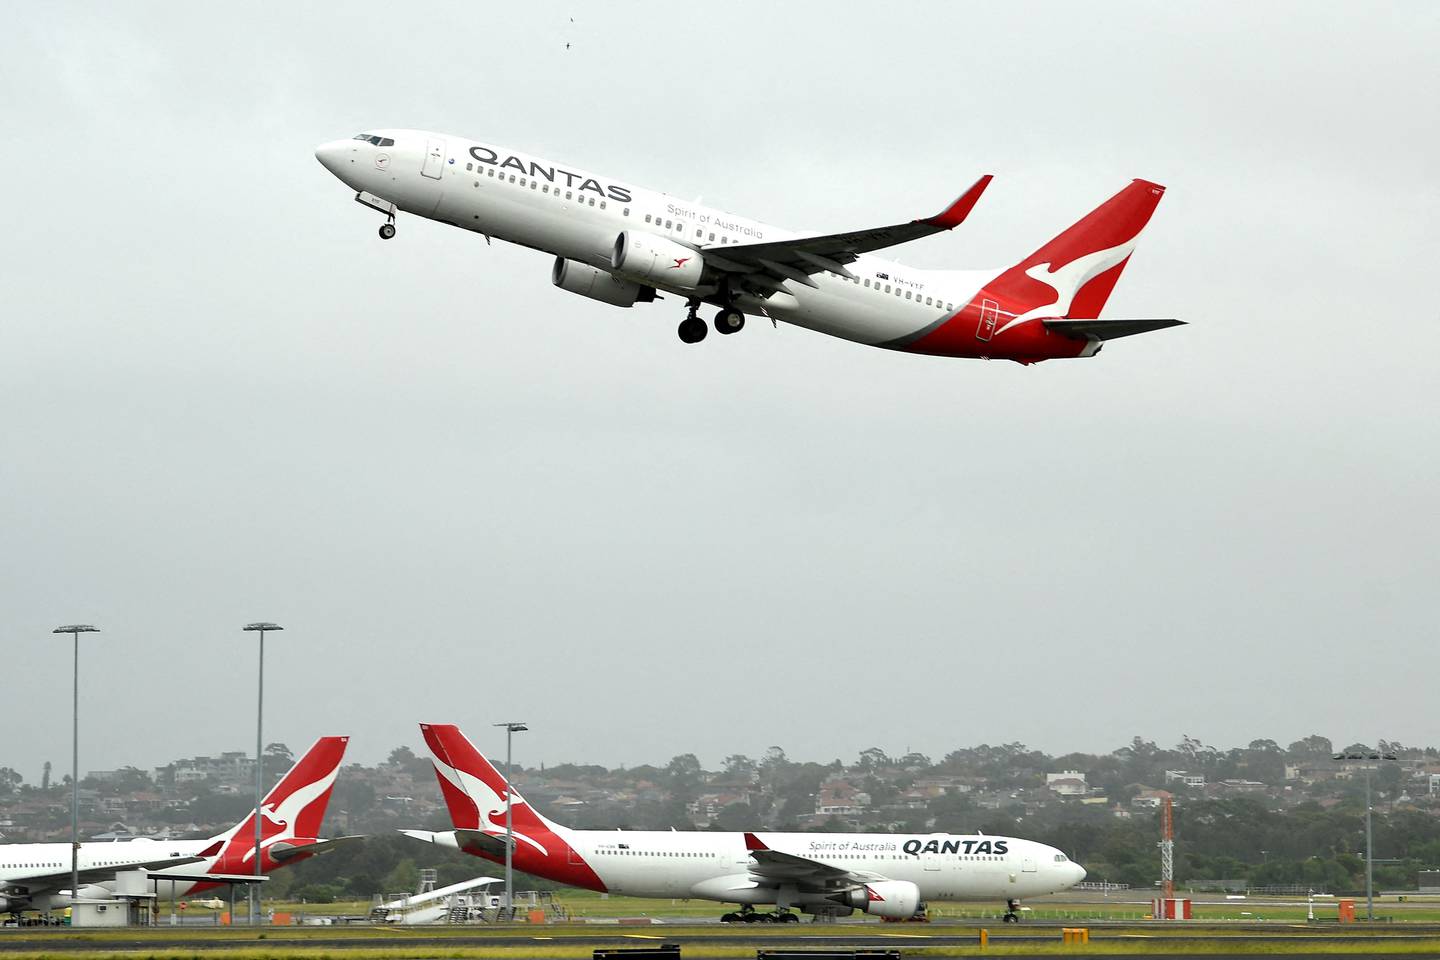 A Qantas passenger plane takes off from Sydney International Airport. AFP